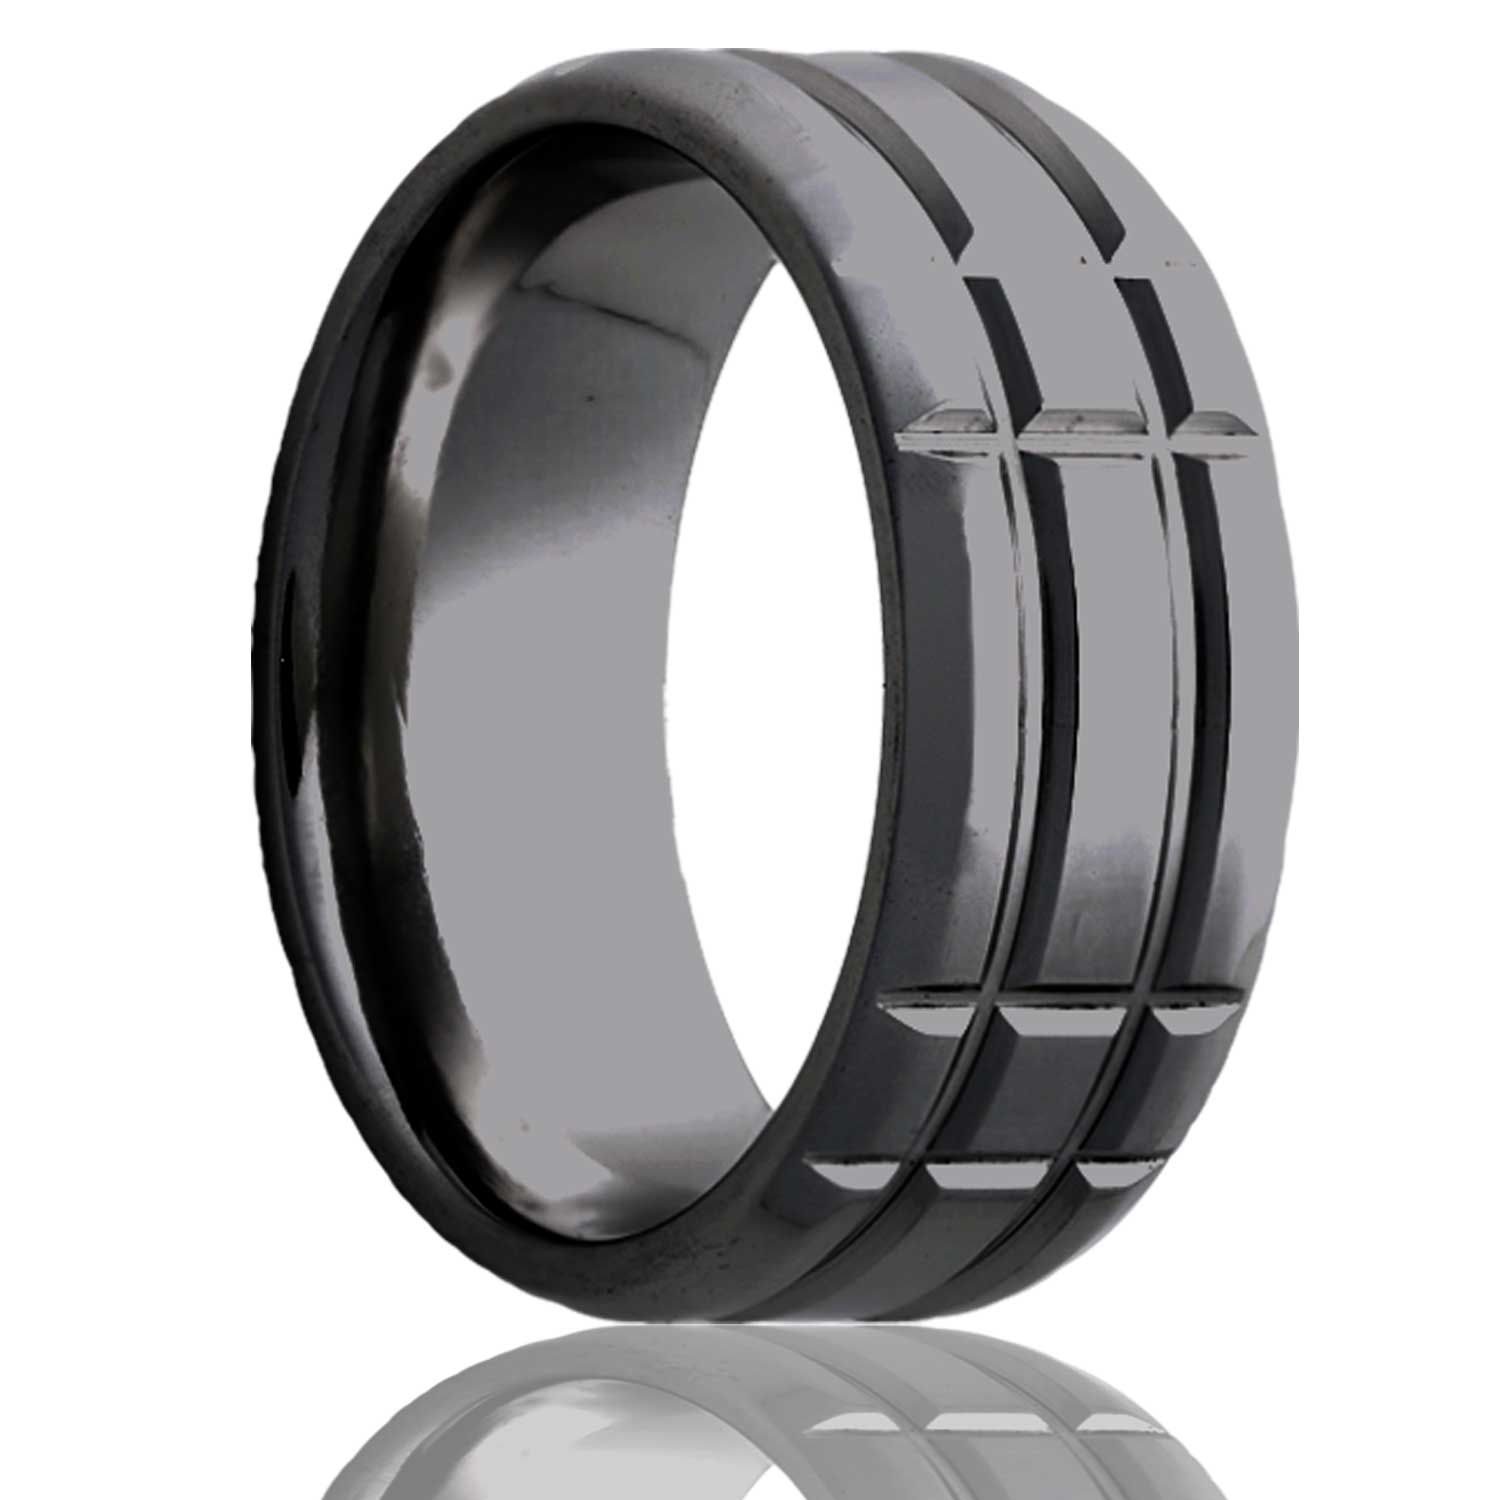 A intersecting grooves zirconium men's wedding band with beveled edges displayed on a neutral white background.